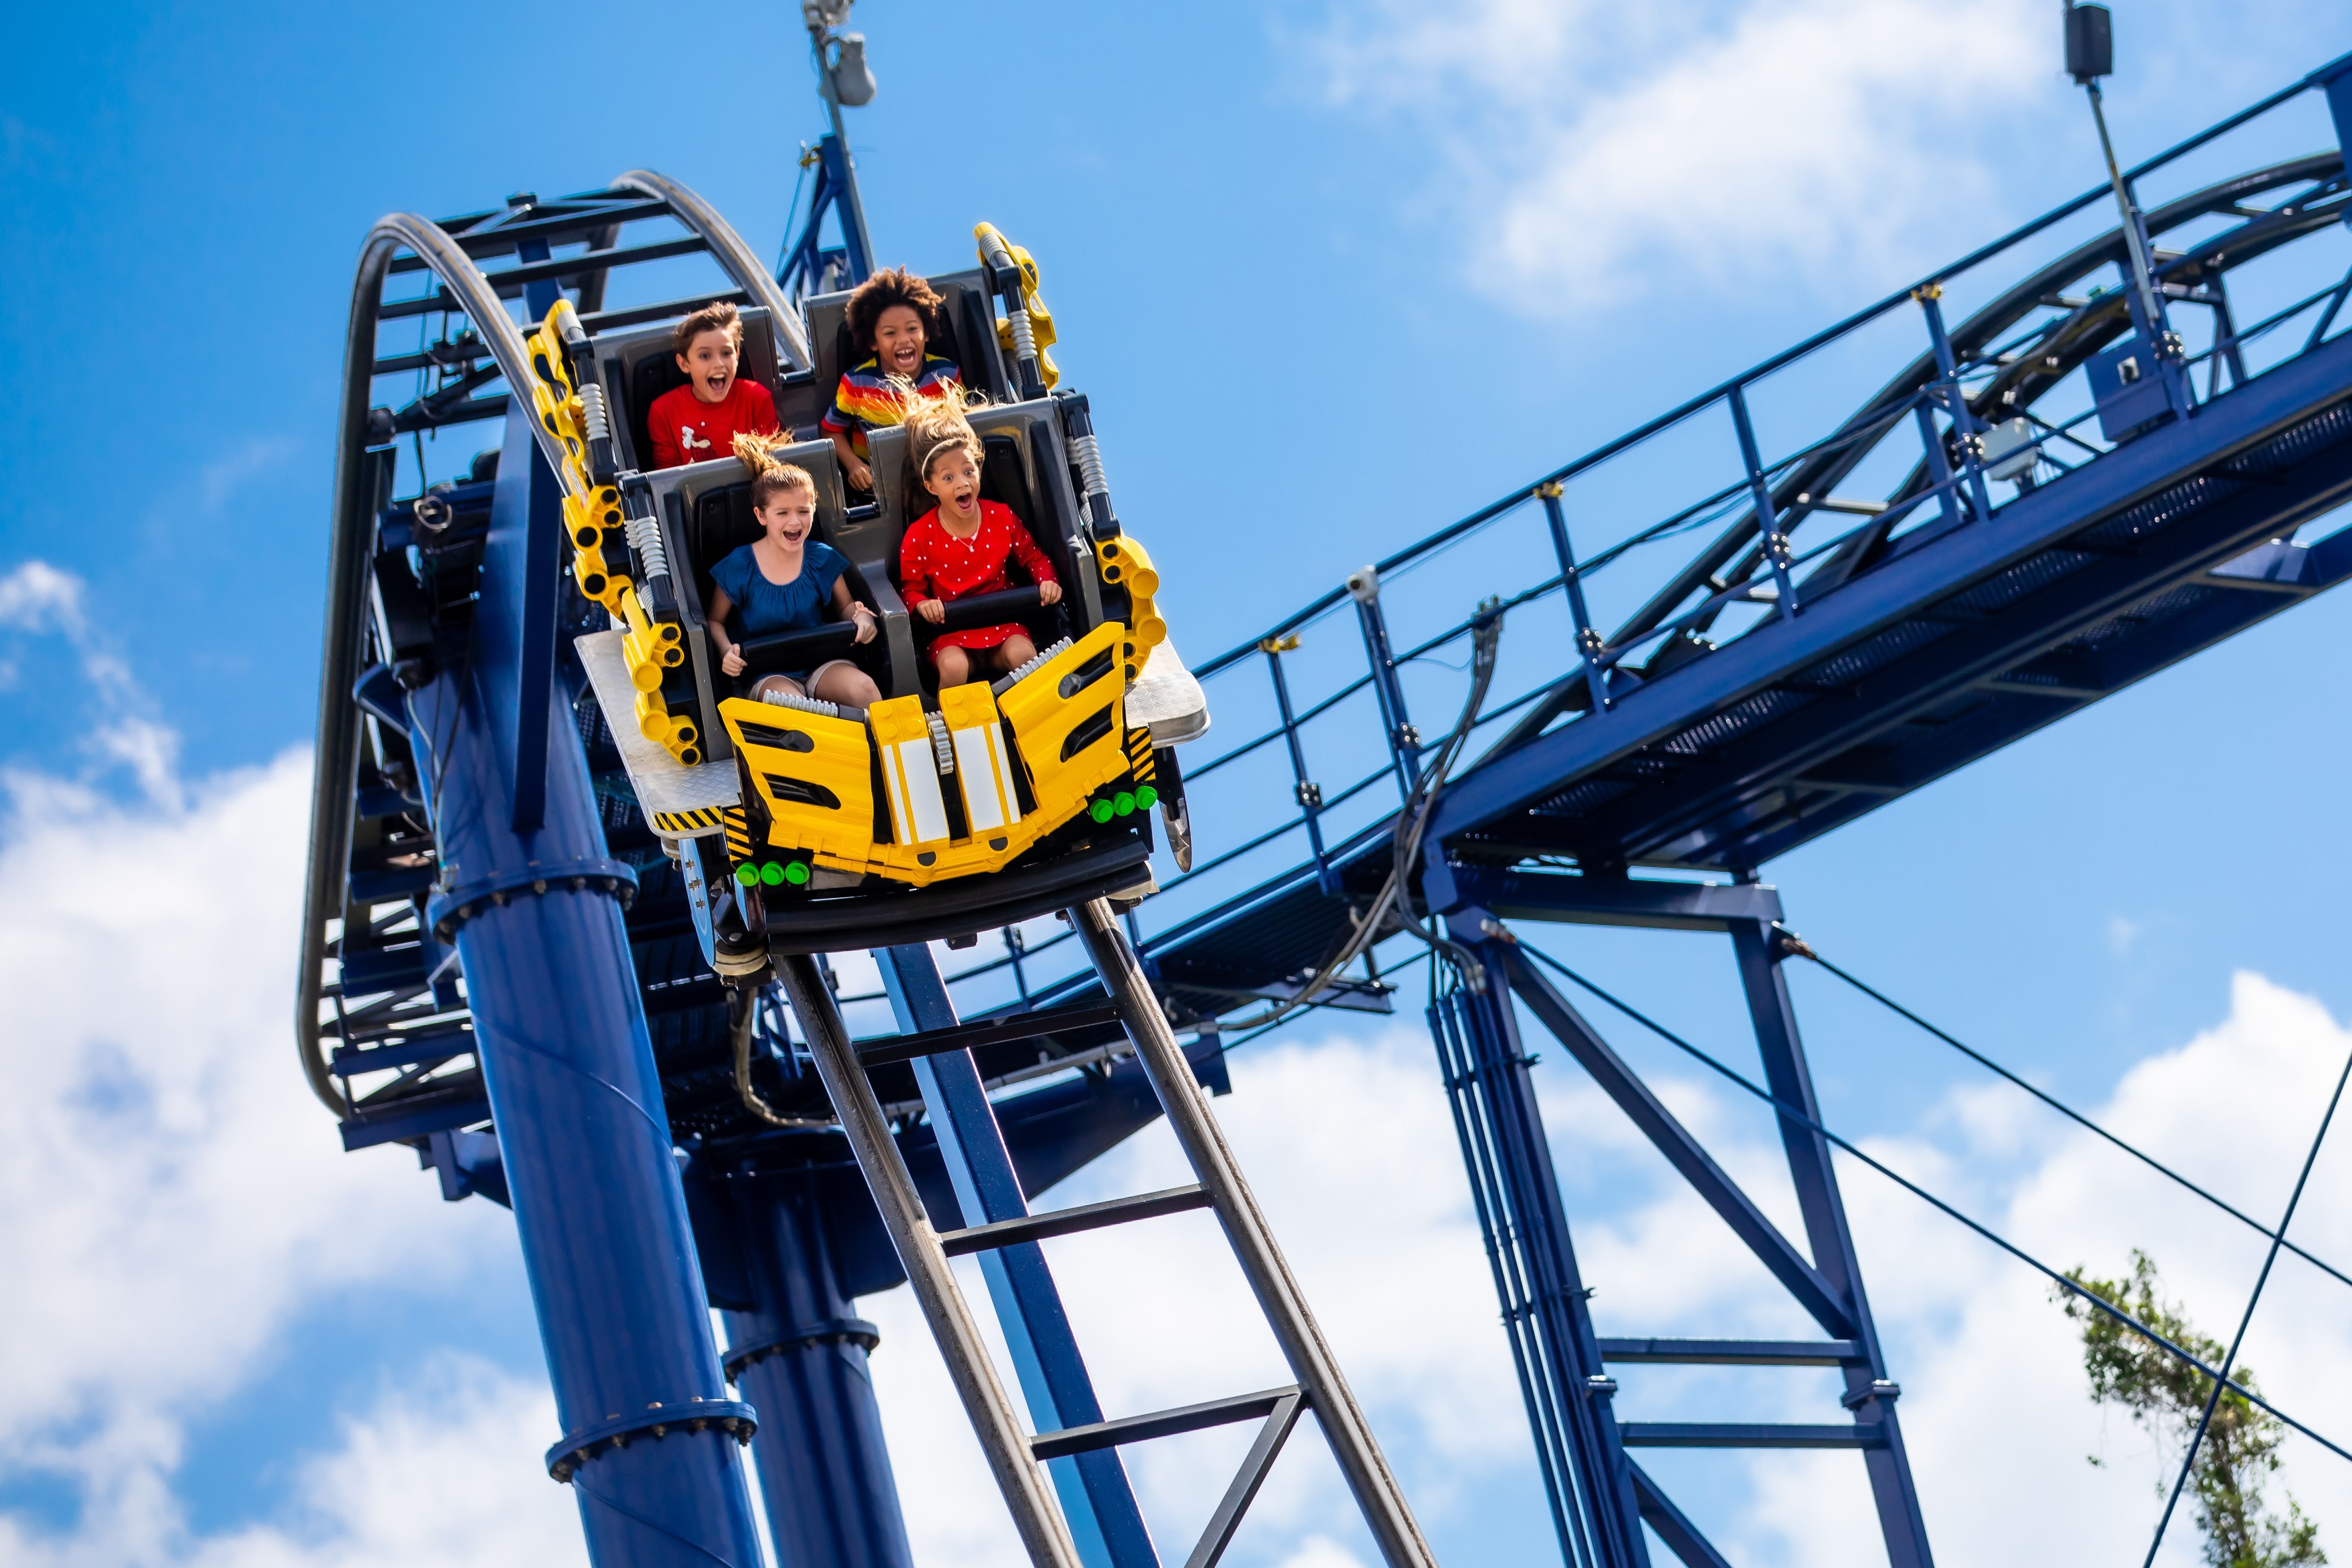 Florida theme parks: Top attractions coming soon